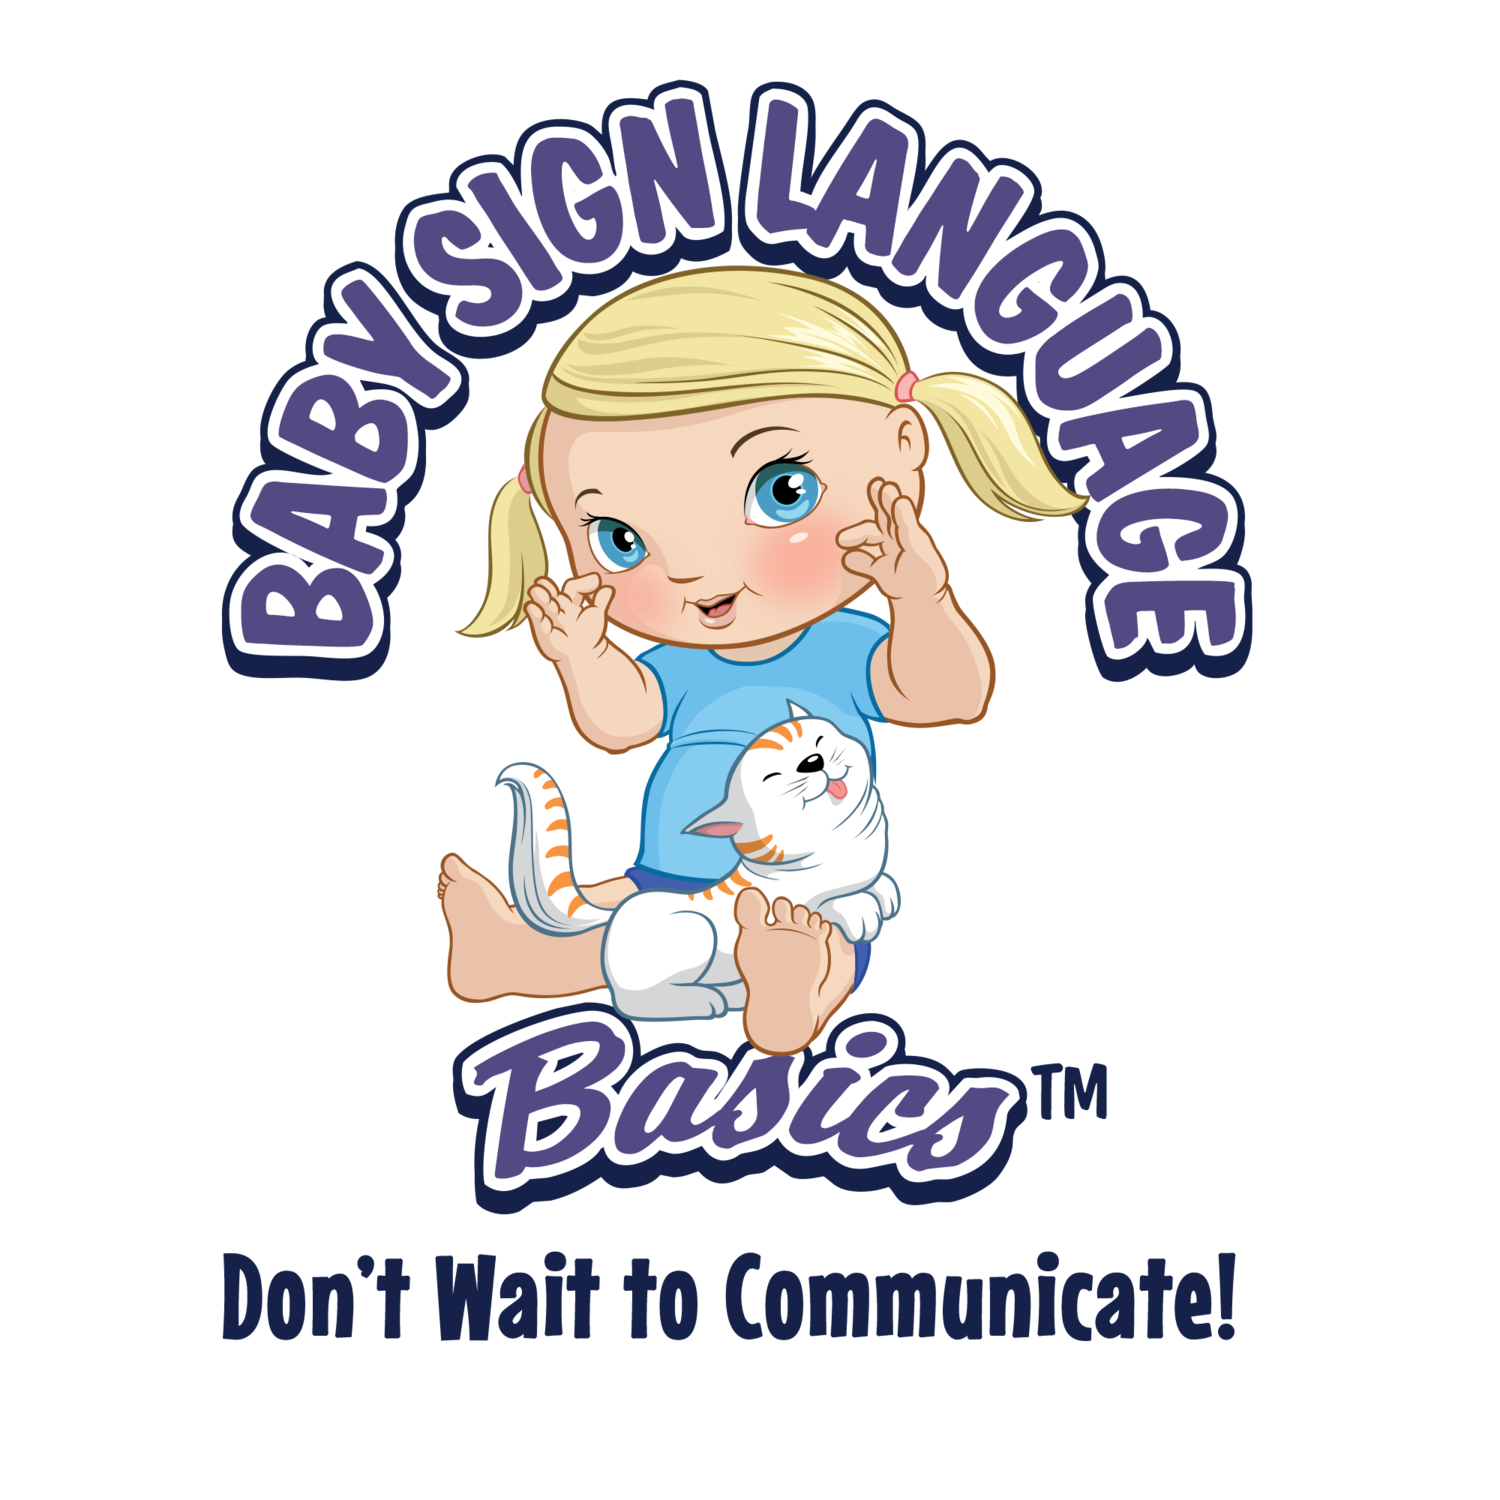 Child with blond hair using sign language